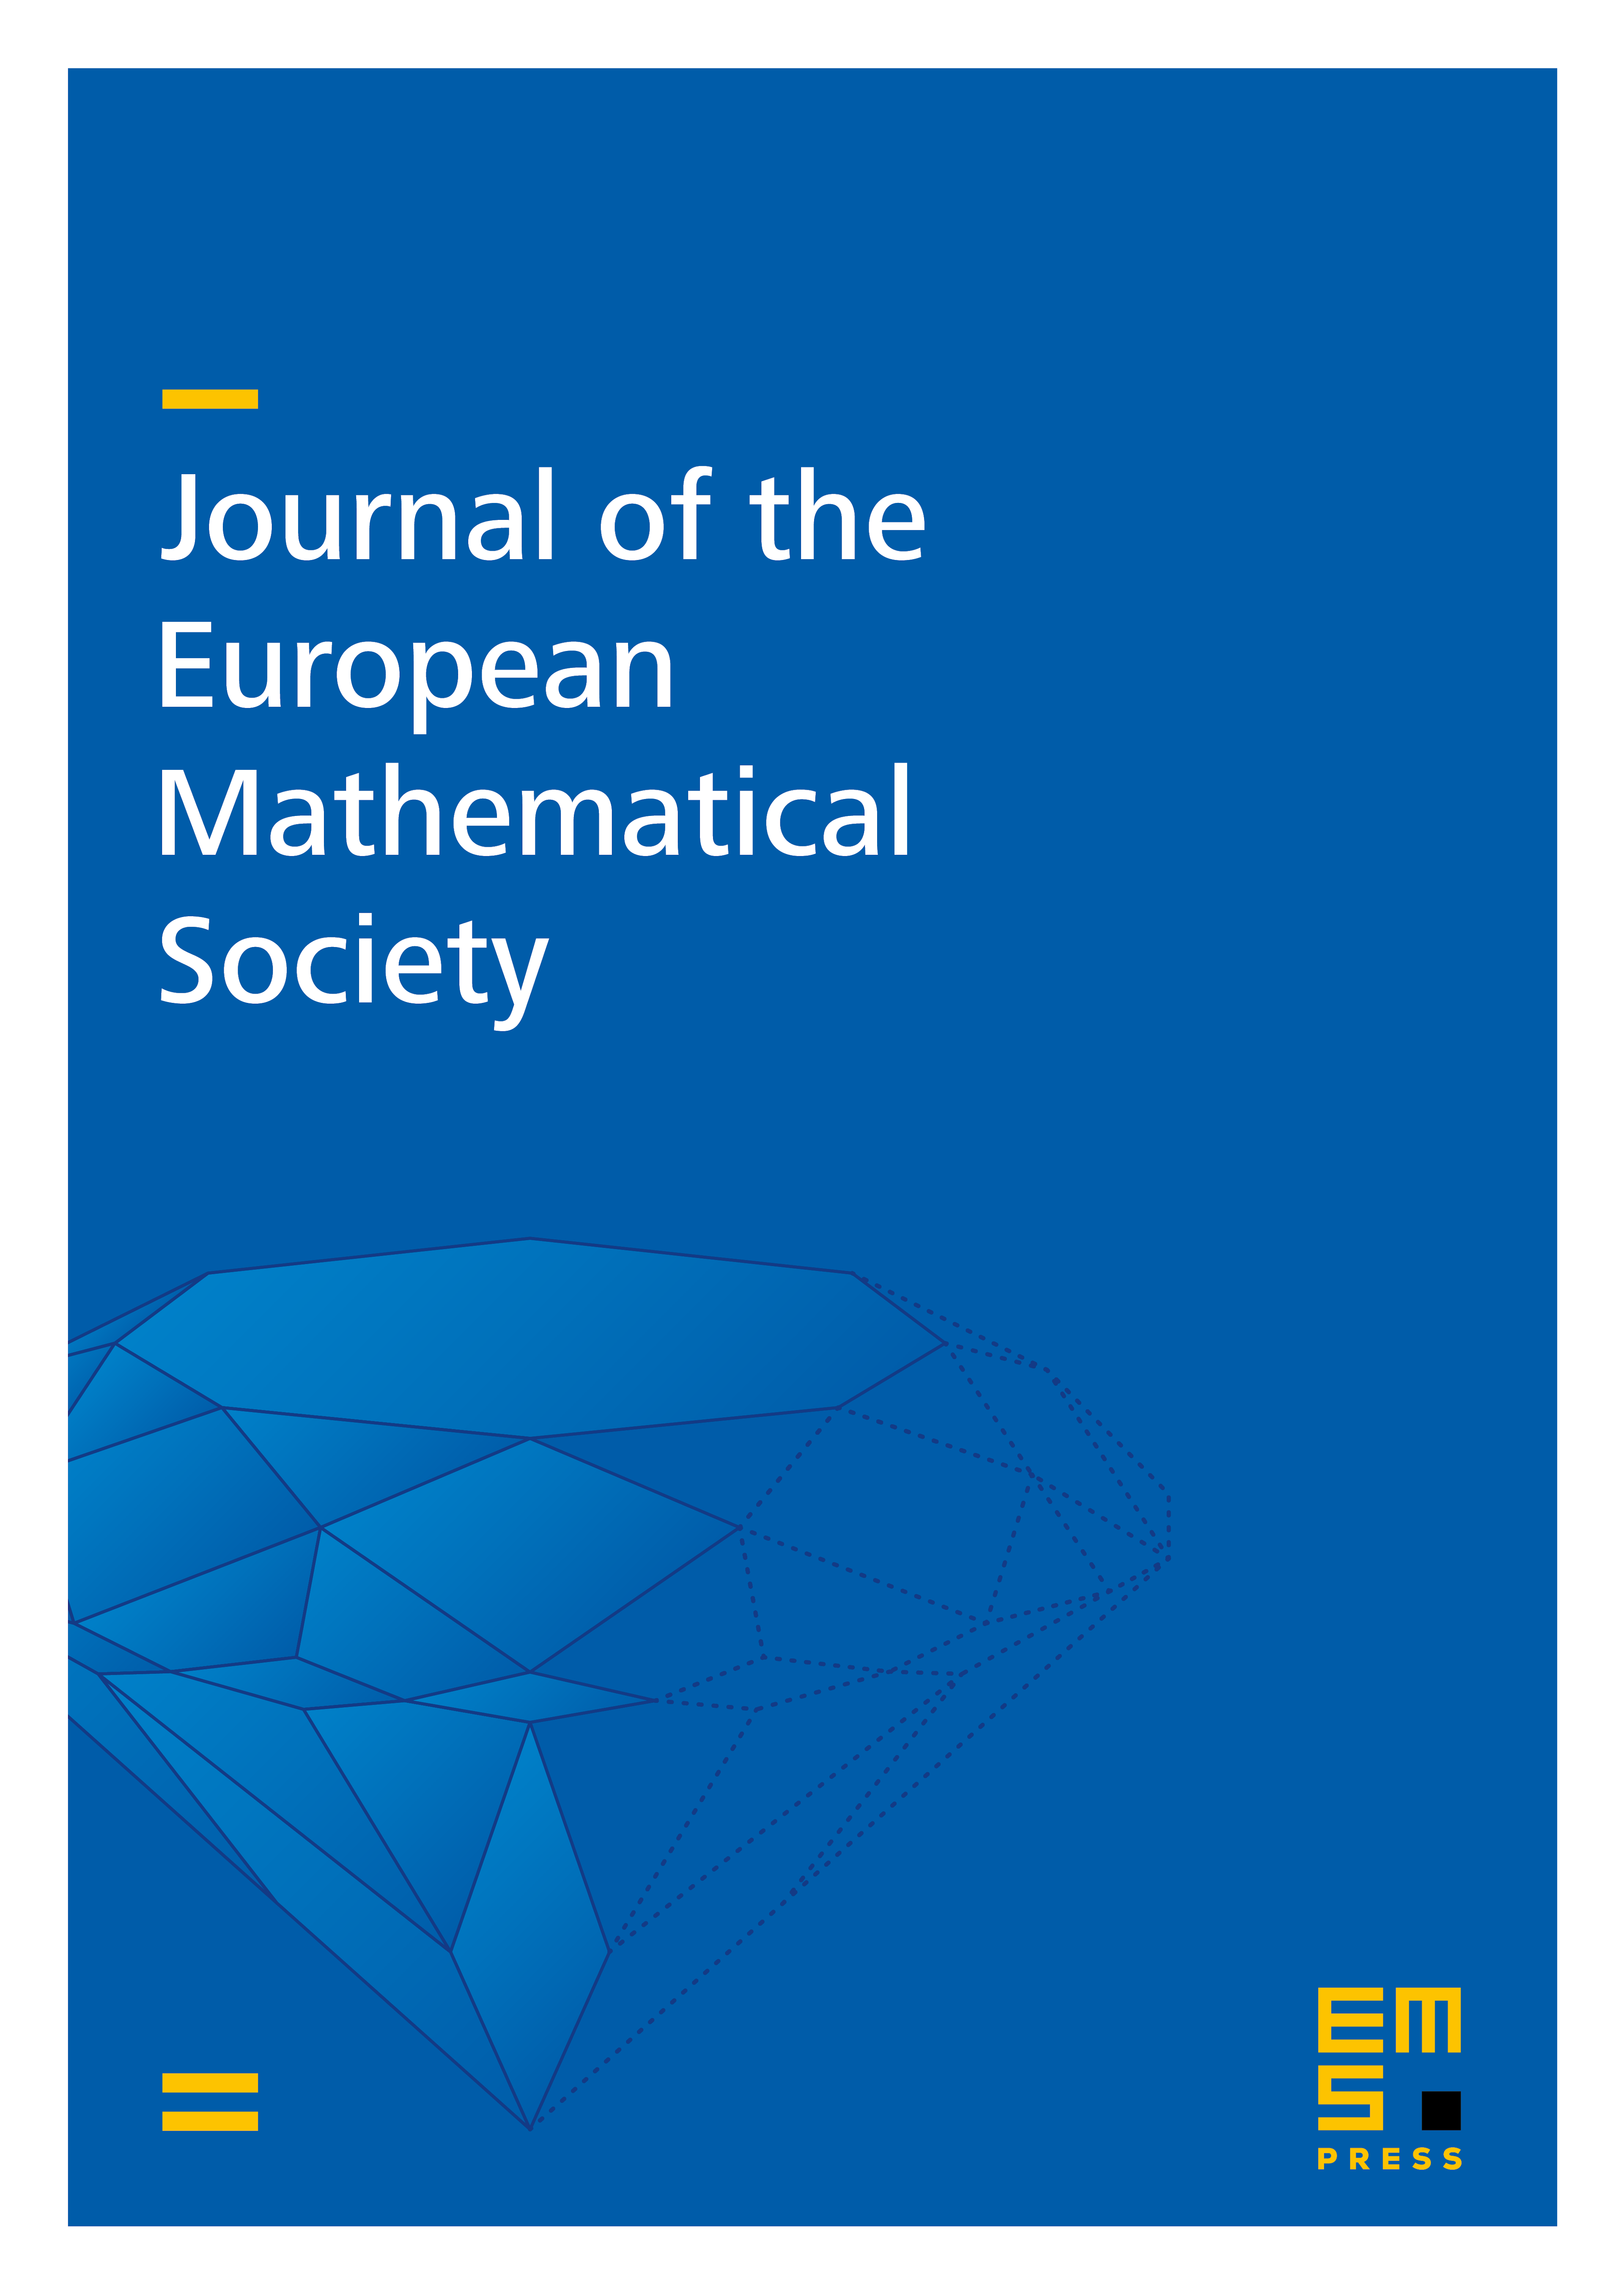 The calculus of thermodynamical formalism cover